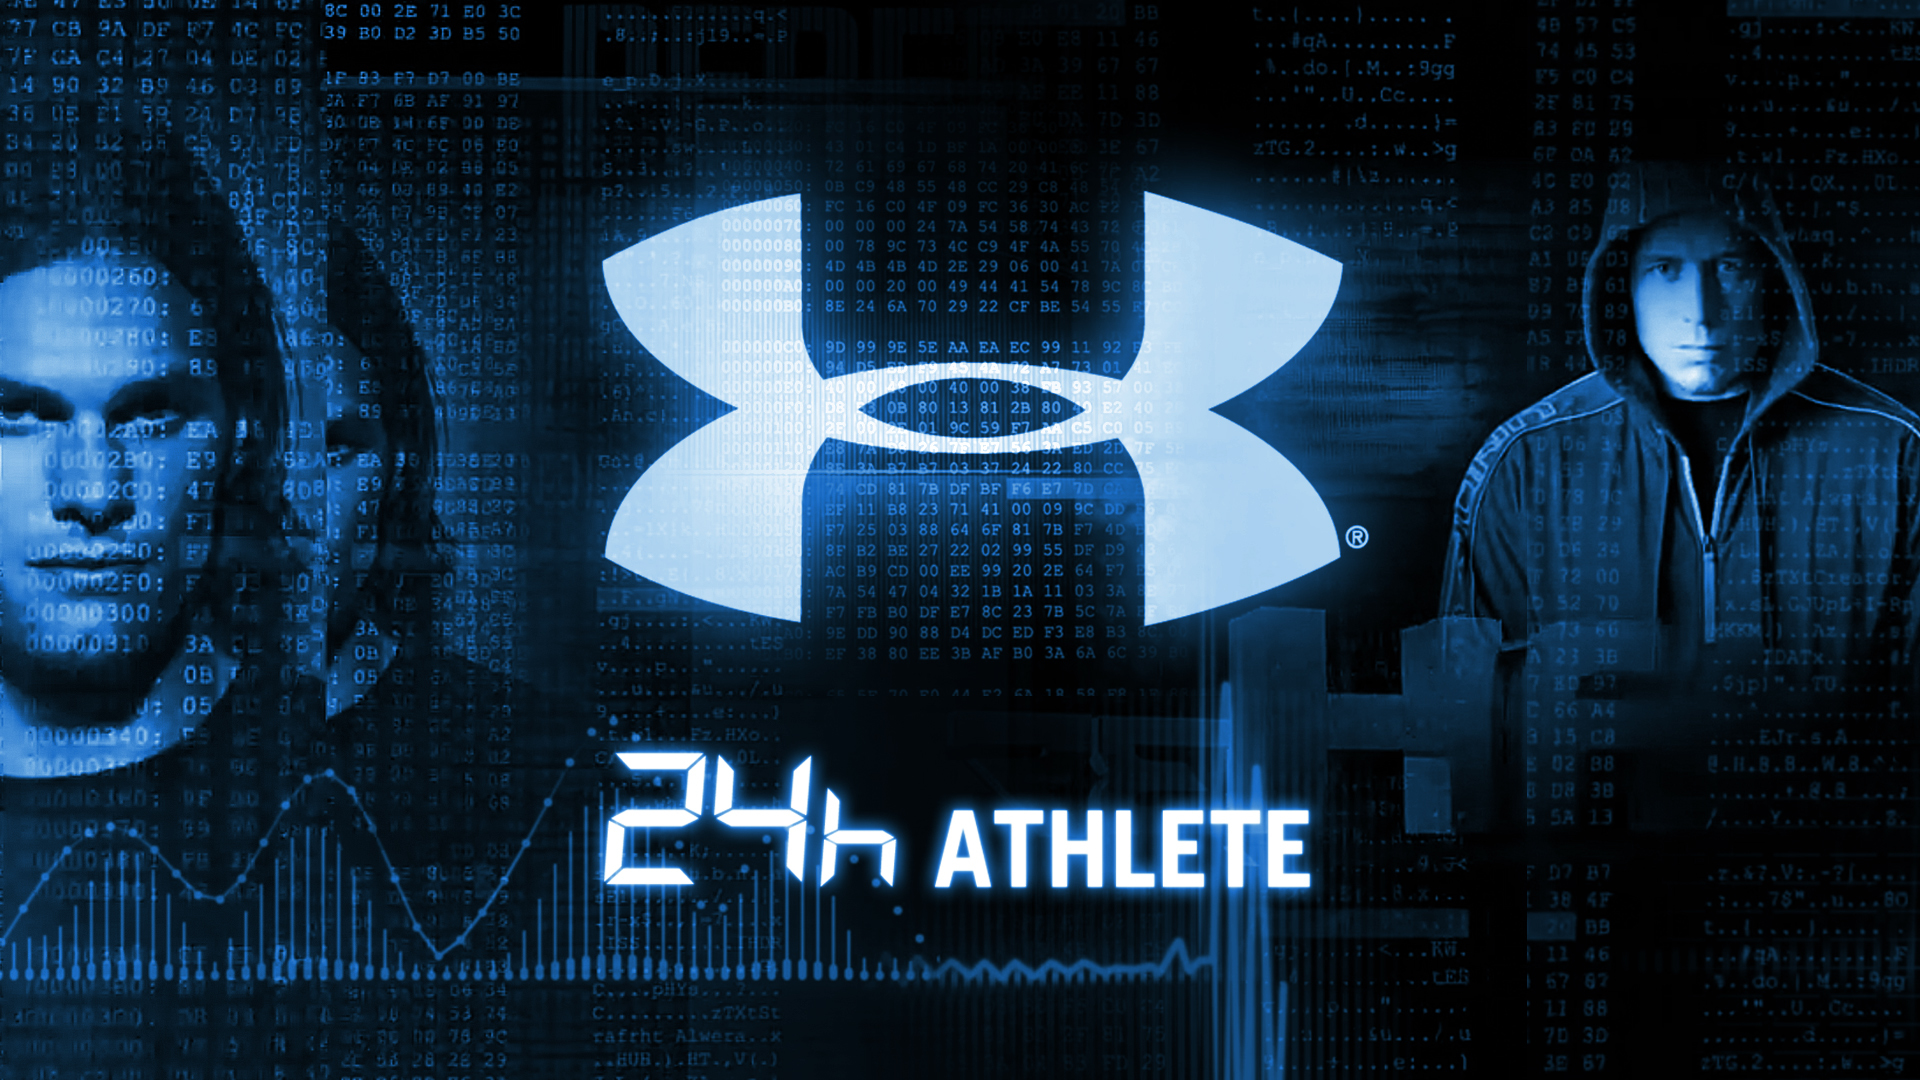 Under armour the 24 hour athlete wallpapers and images   wallpapers